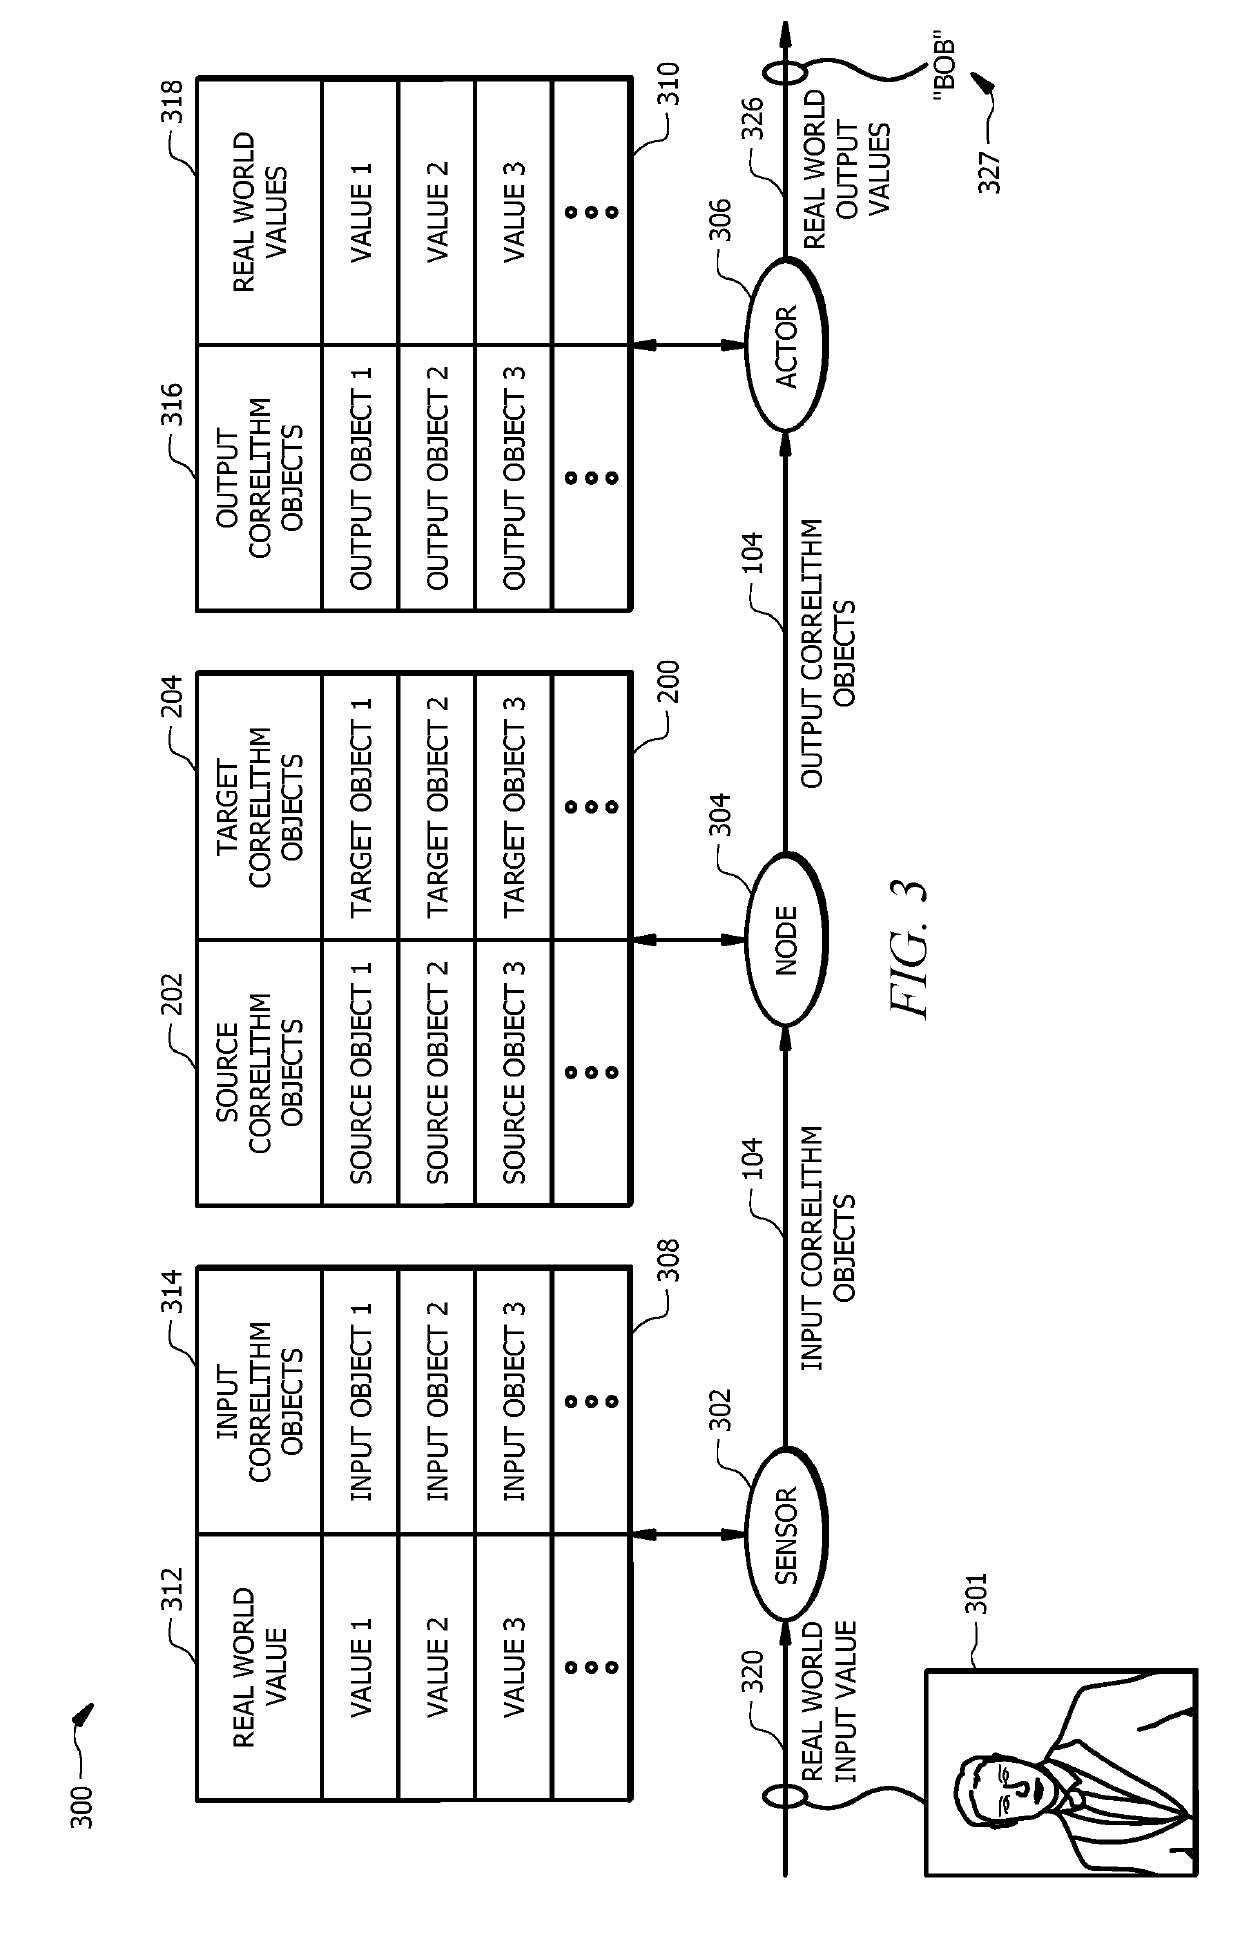 Computer architecture for emulating a correlithm object processing system that uses portions of correlithm objects and portions of a mapping table in a distributed node network